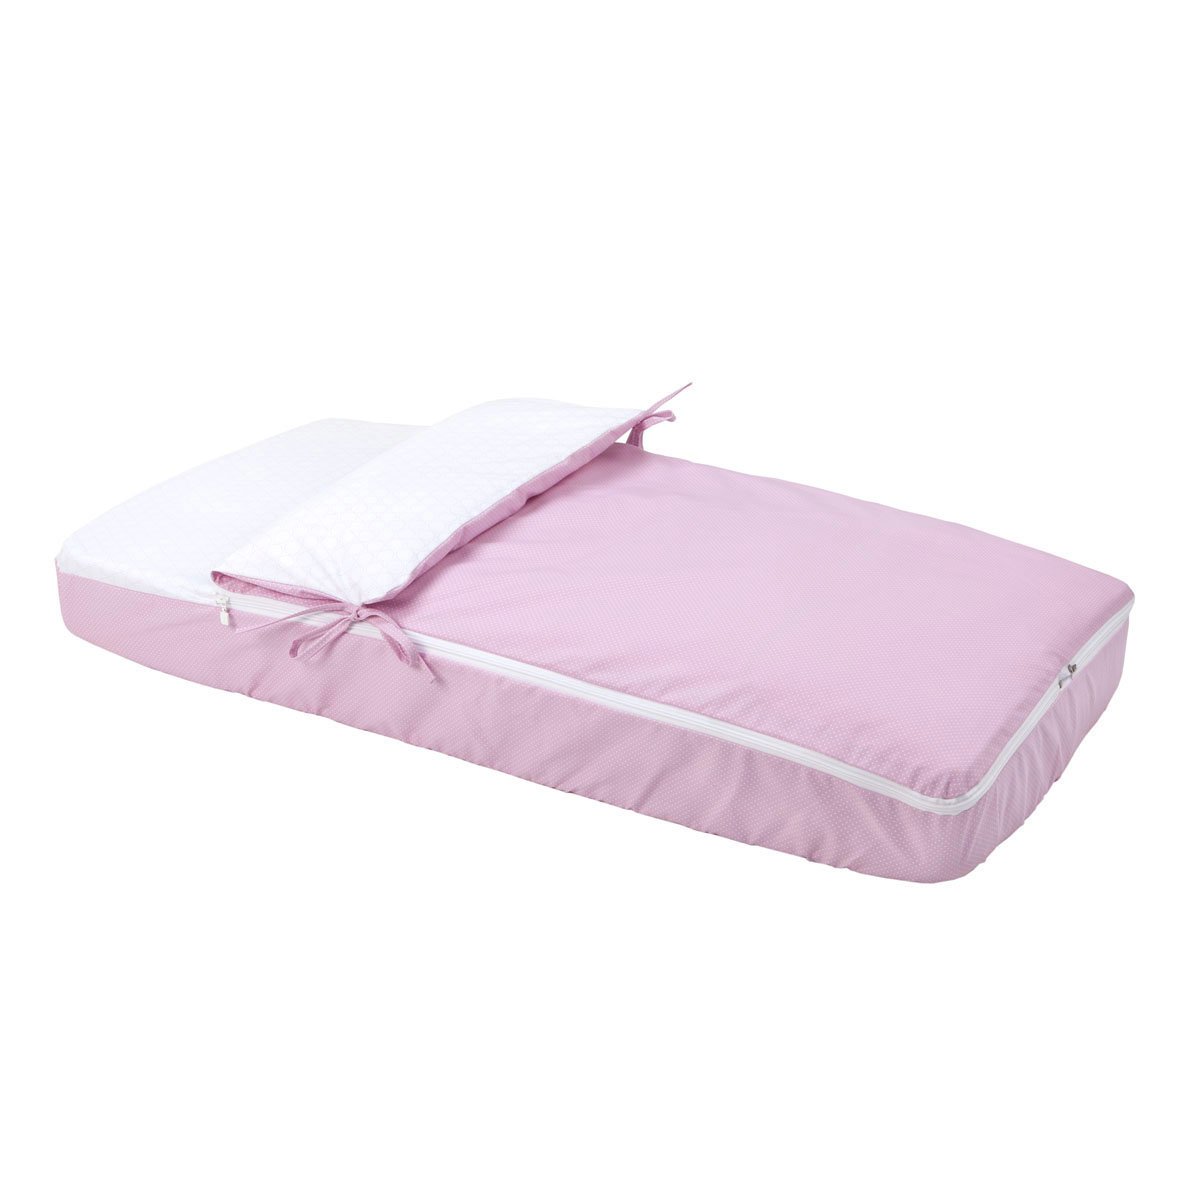 Cambrass 41044 Sleeping Bag for Baby I/V Pic, 60 x 120 cm, Pink